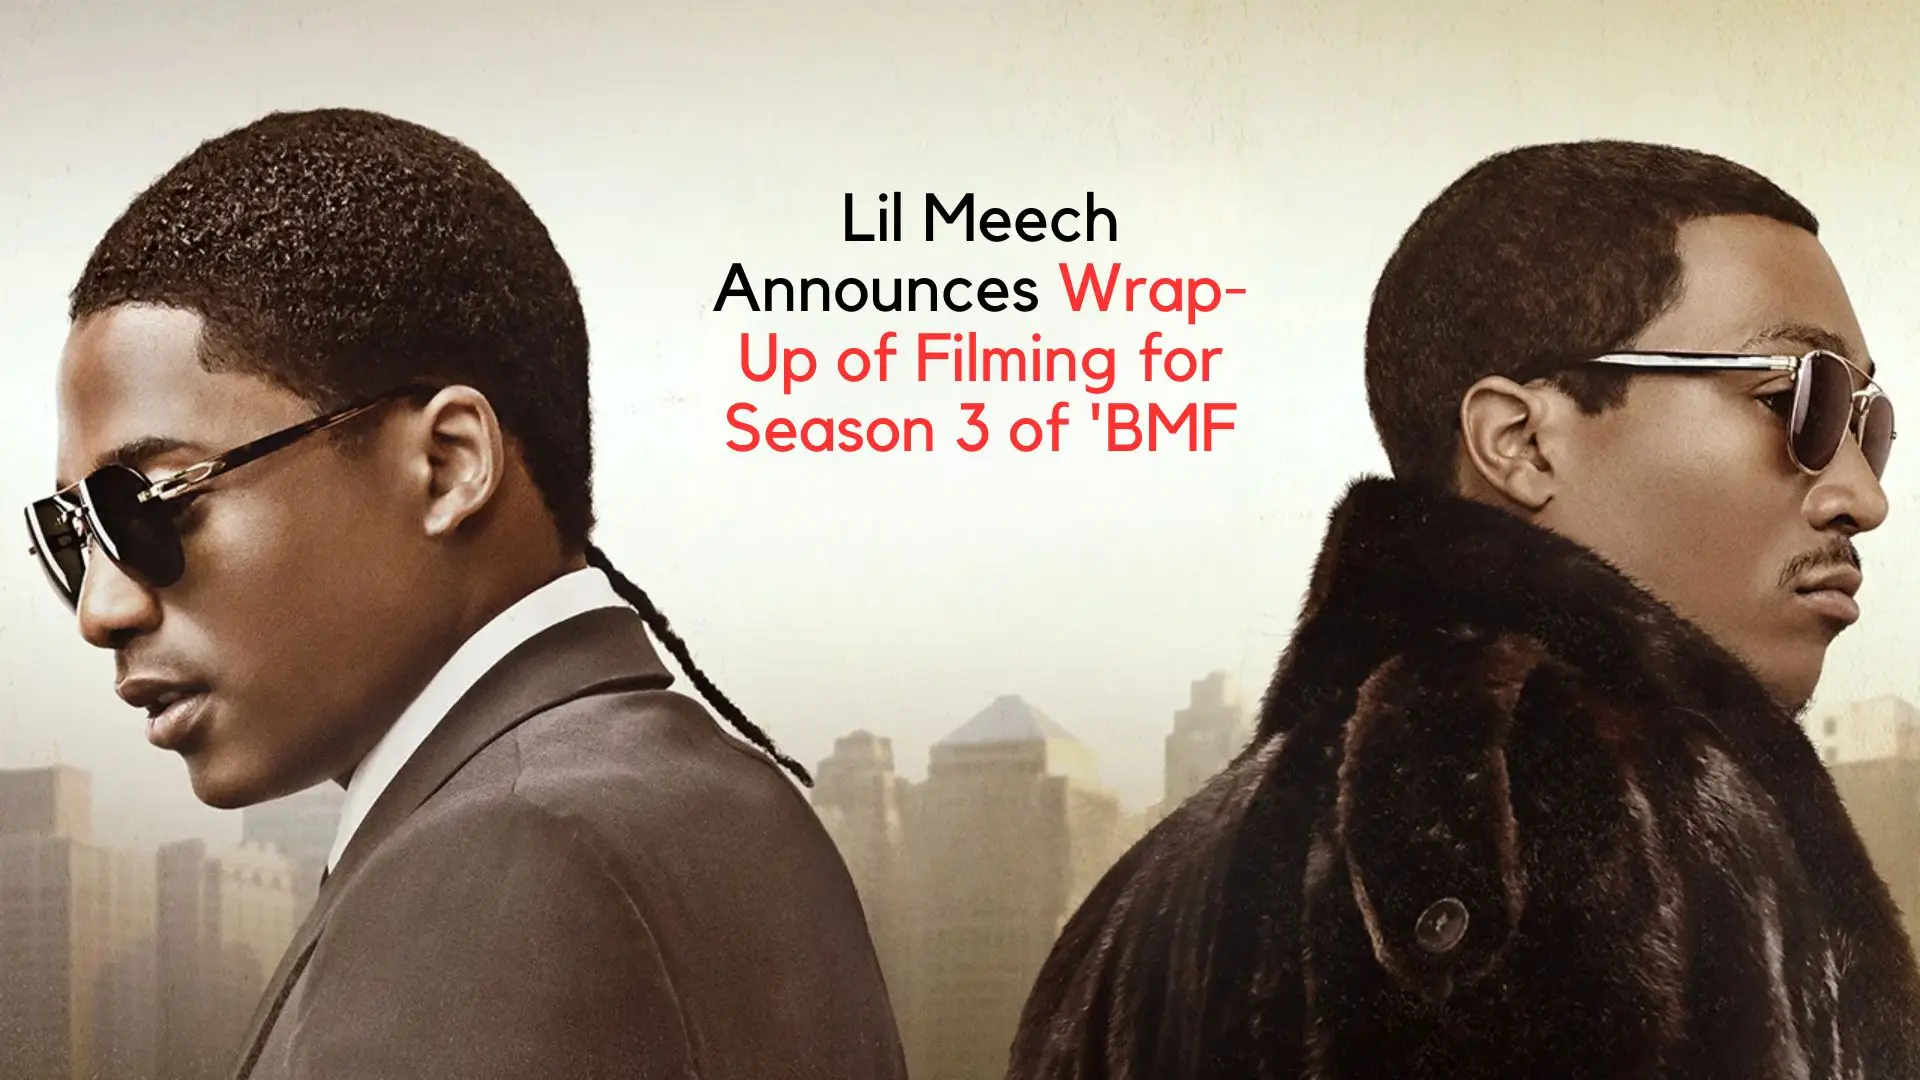 Lil Meech Announces Wrap-Up of Filming for Season 3 of 'BMF